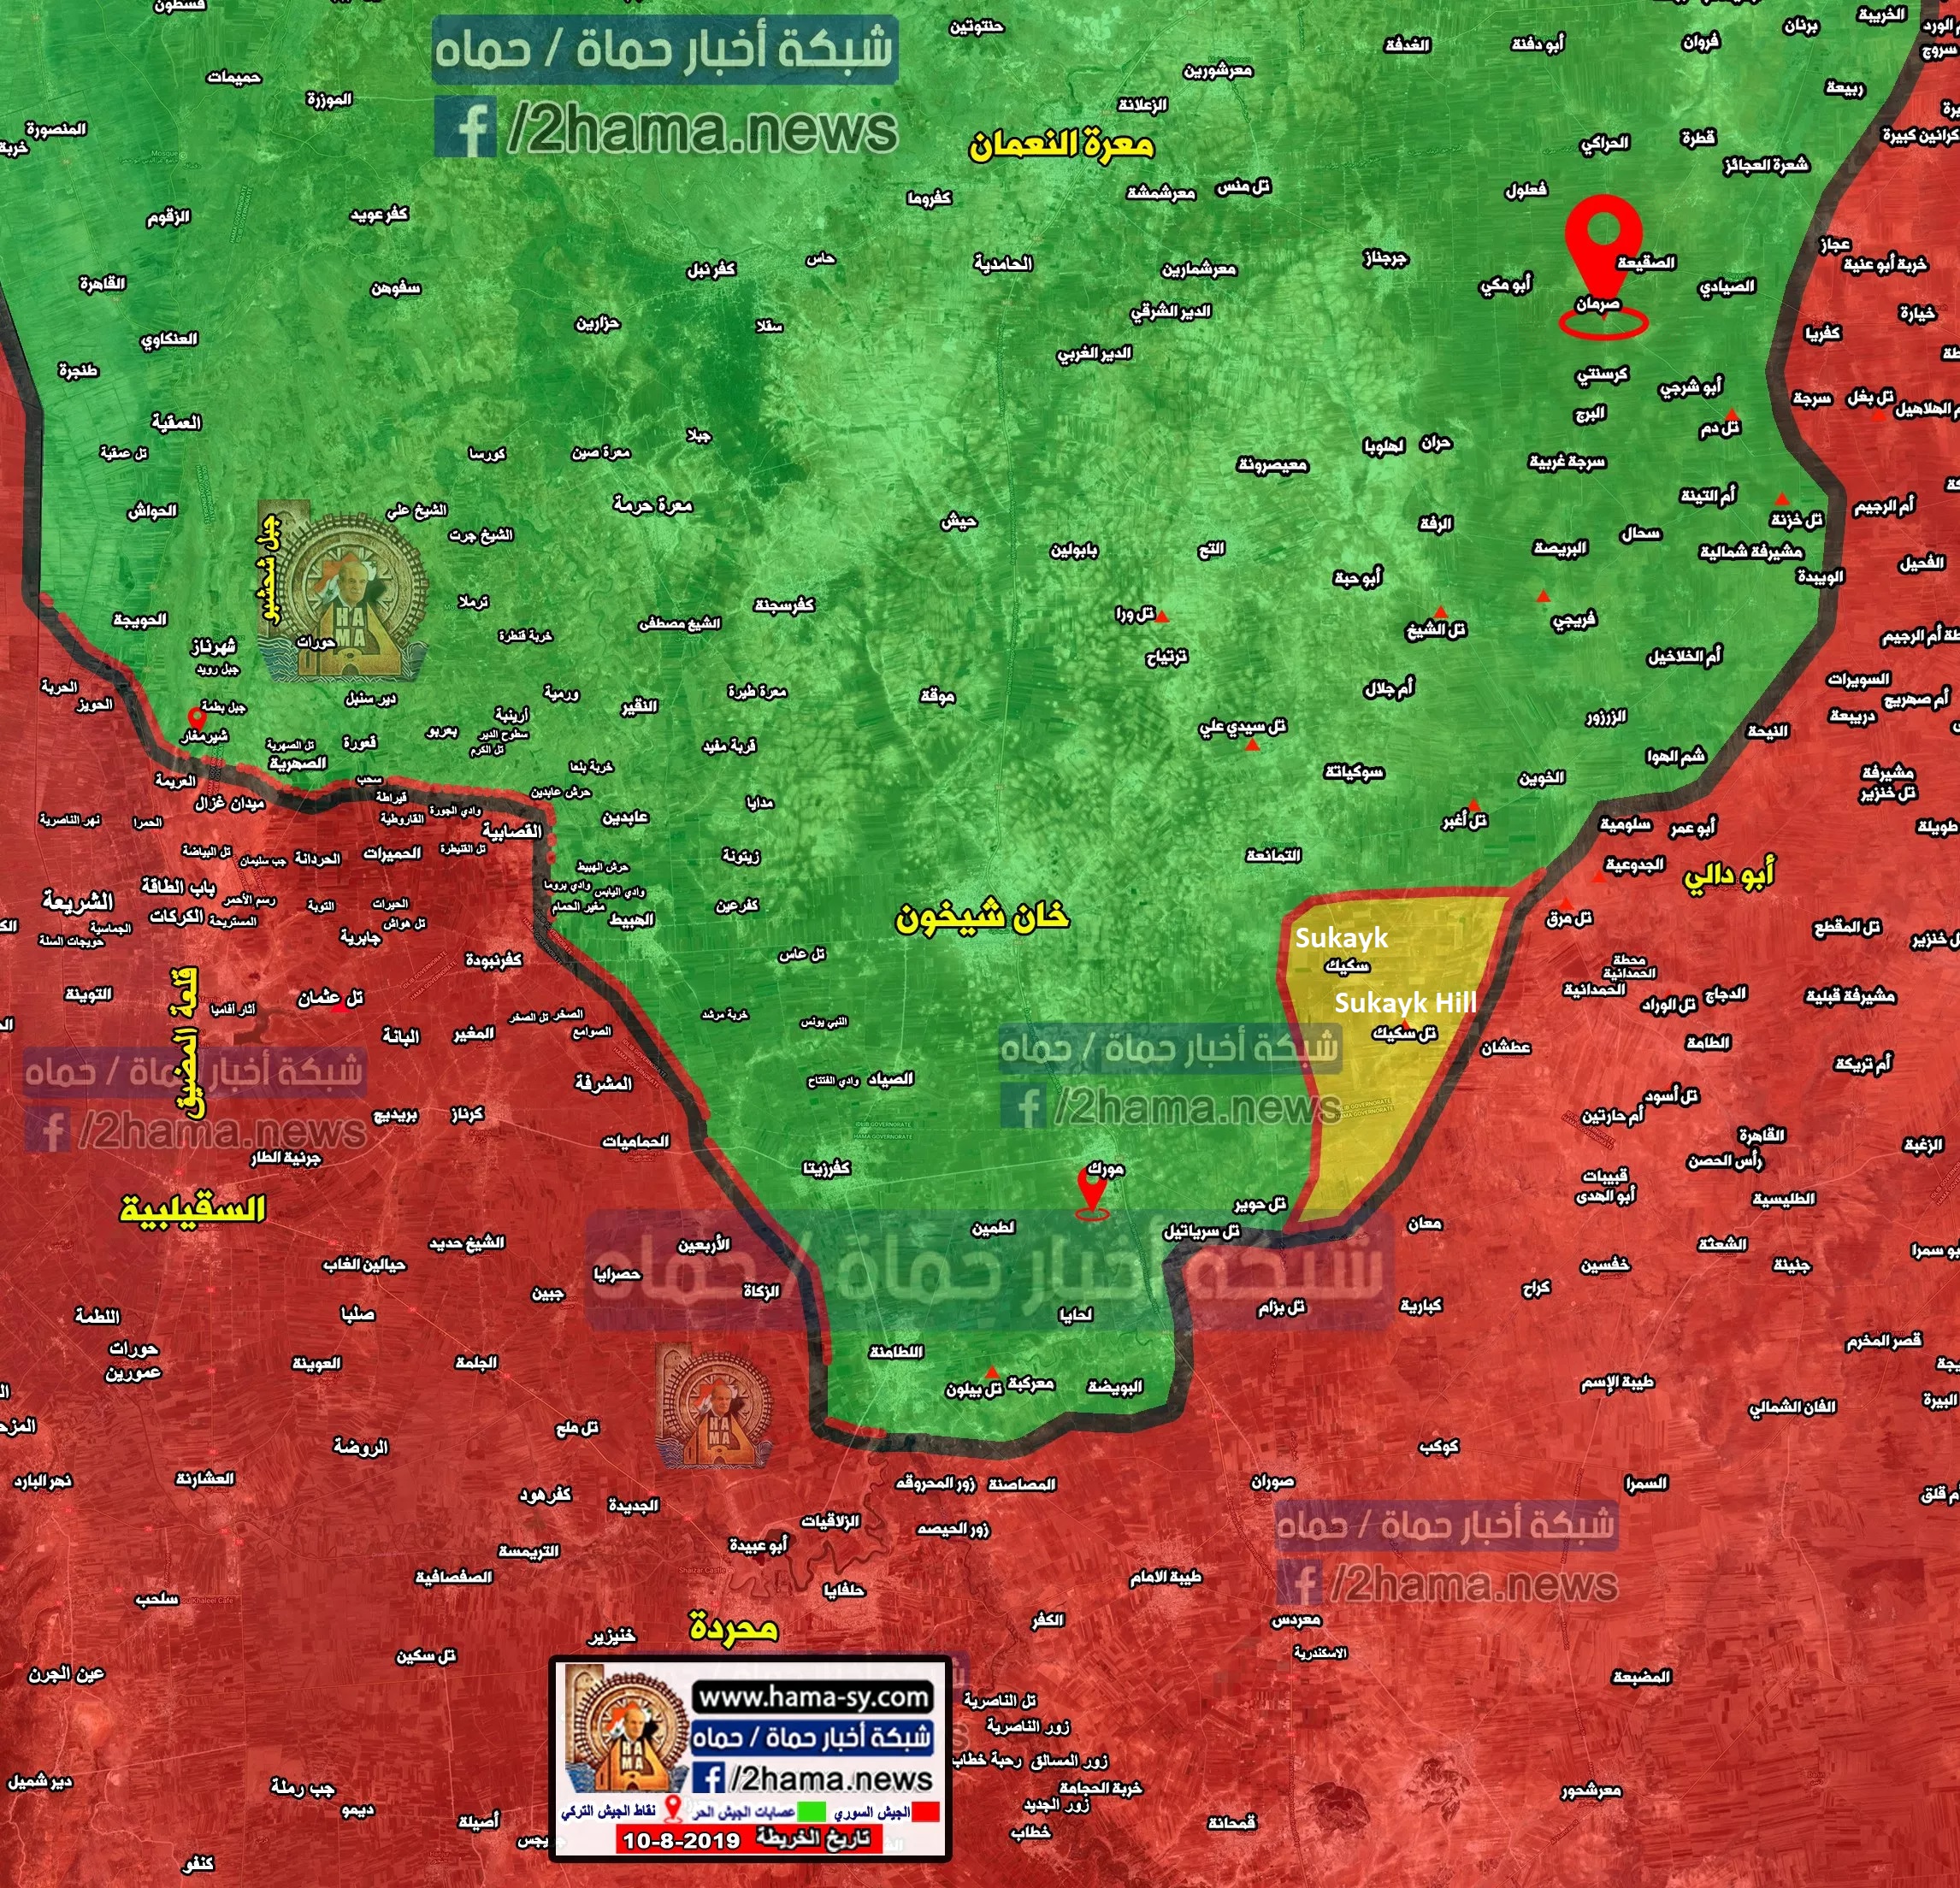 Syrian Army Liberates Key Town After Flanking Militants' Positions In Hama (Map)